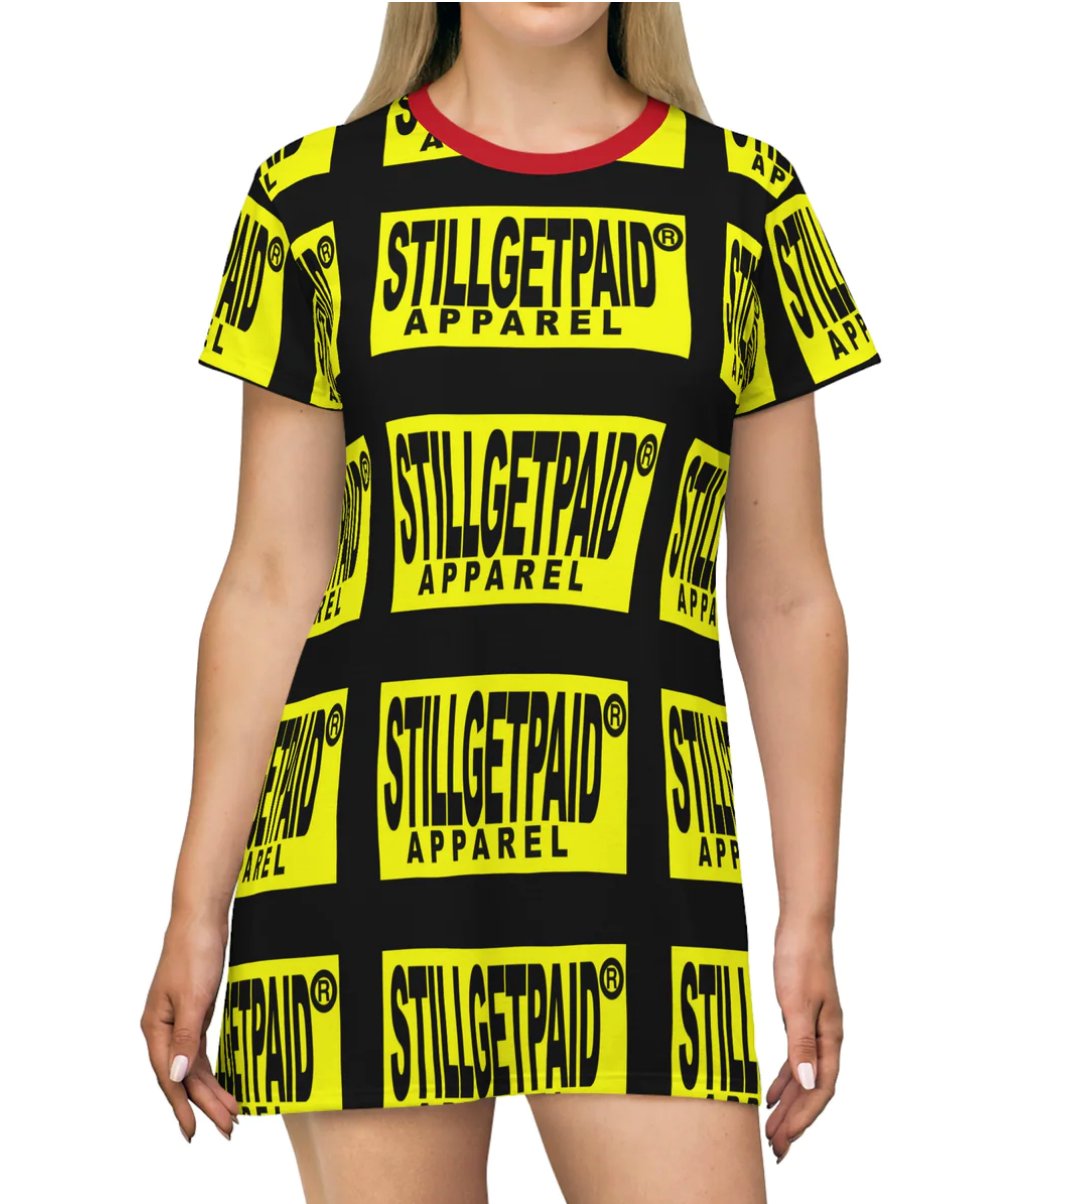 This Stillgetpaid All-Over-Print T-Shirt Dress is tagless, custom cut and sewn to match every style. The fun prints will make this t-shirt dress a great piece to sell online